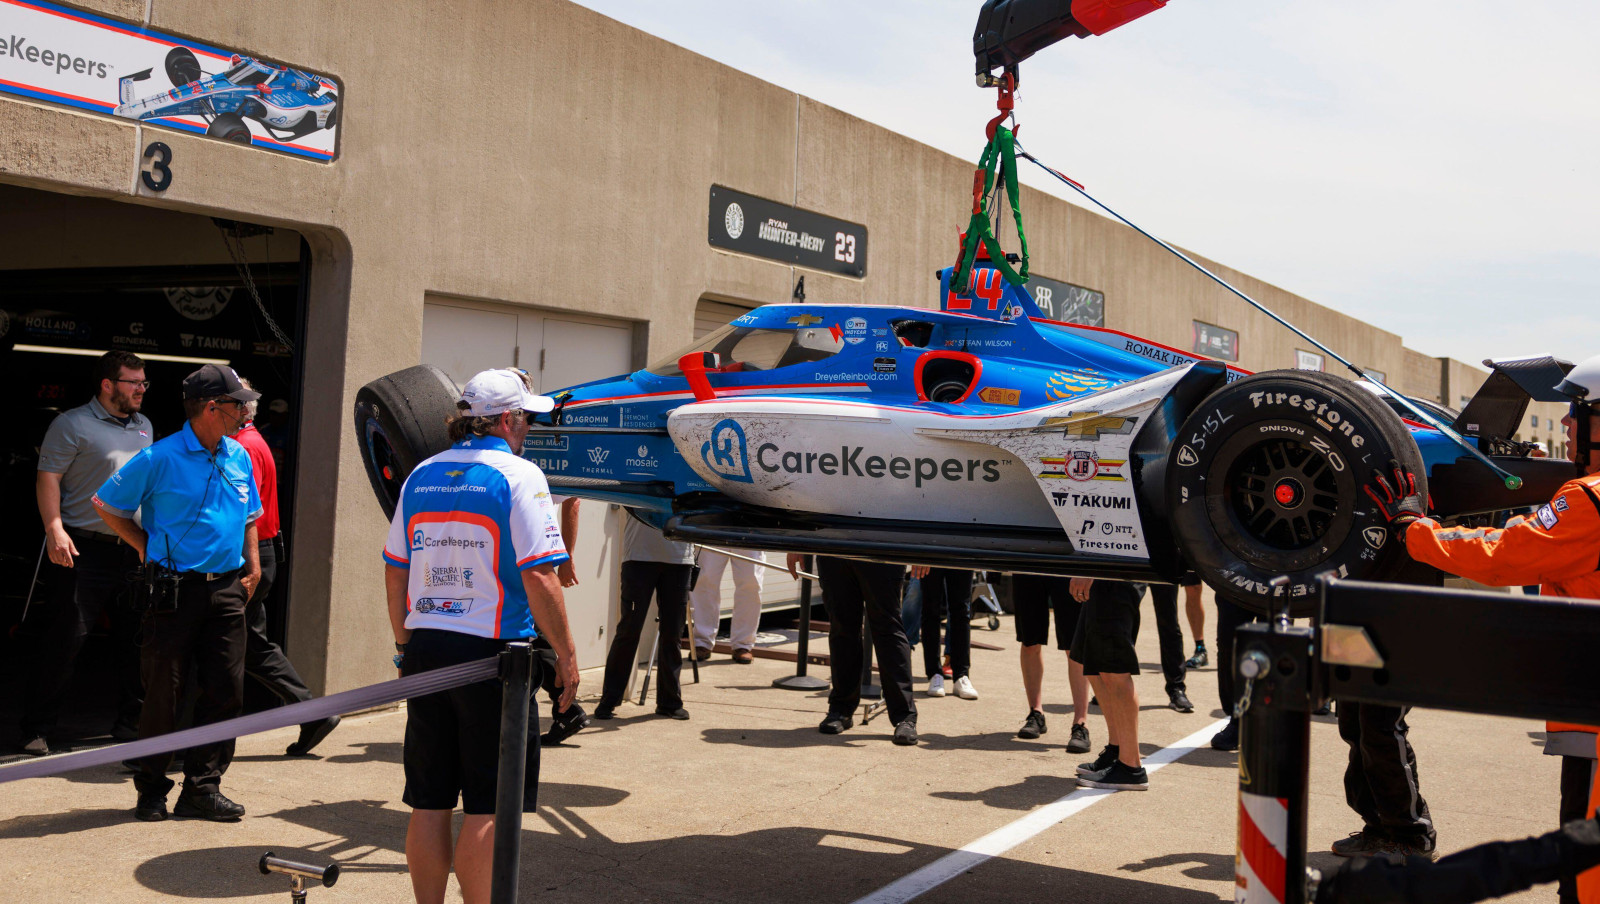 Stefan Wilson out of the Indianapolis 500 after suffering a fractured vertebrae